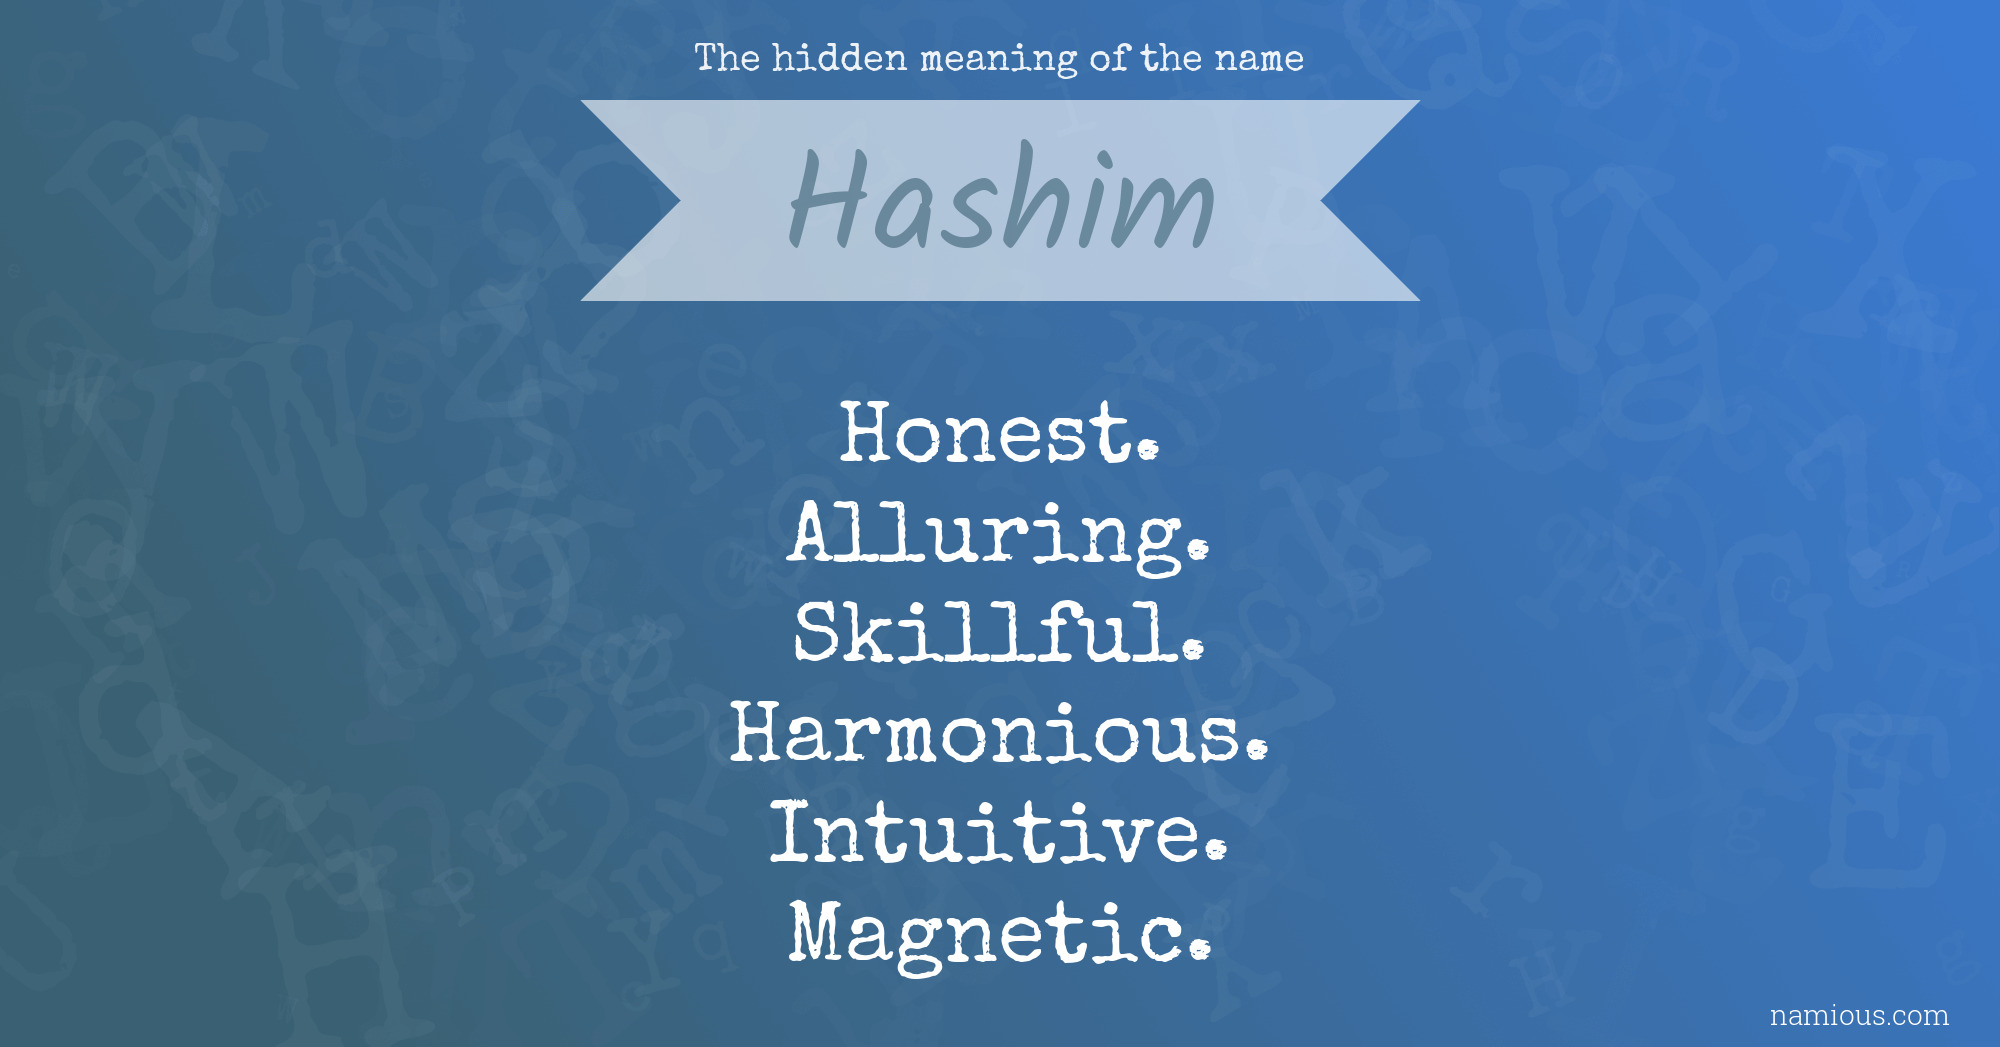 The hidden meaning of the name Hashim